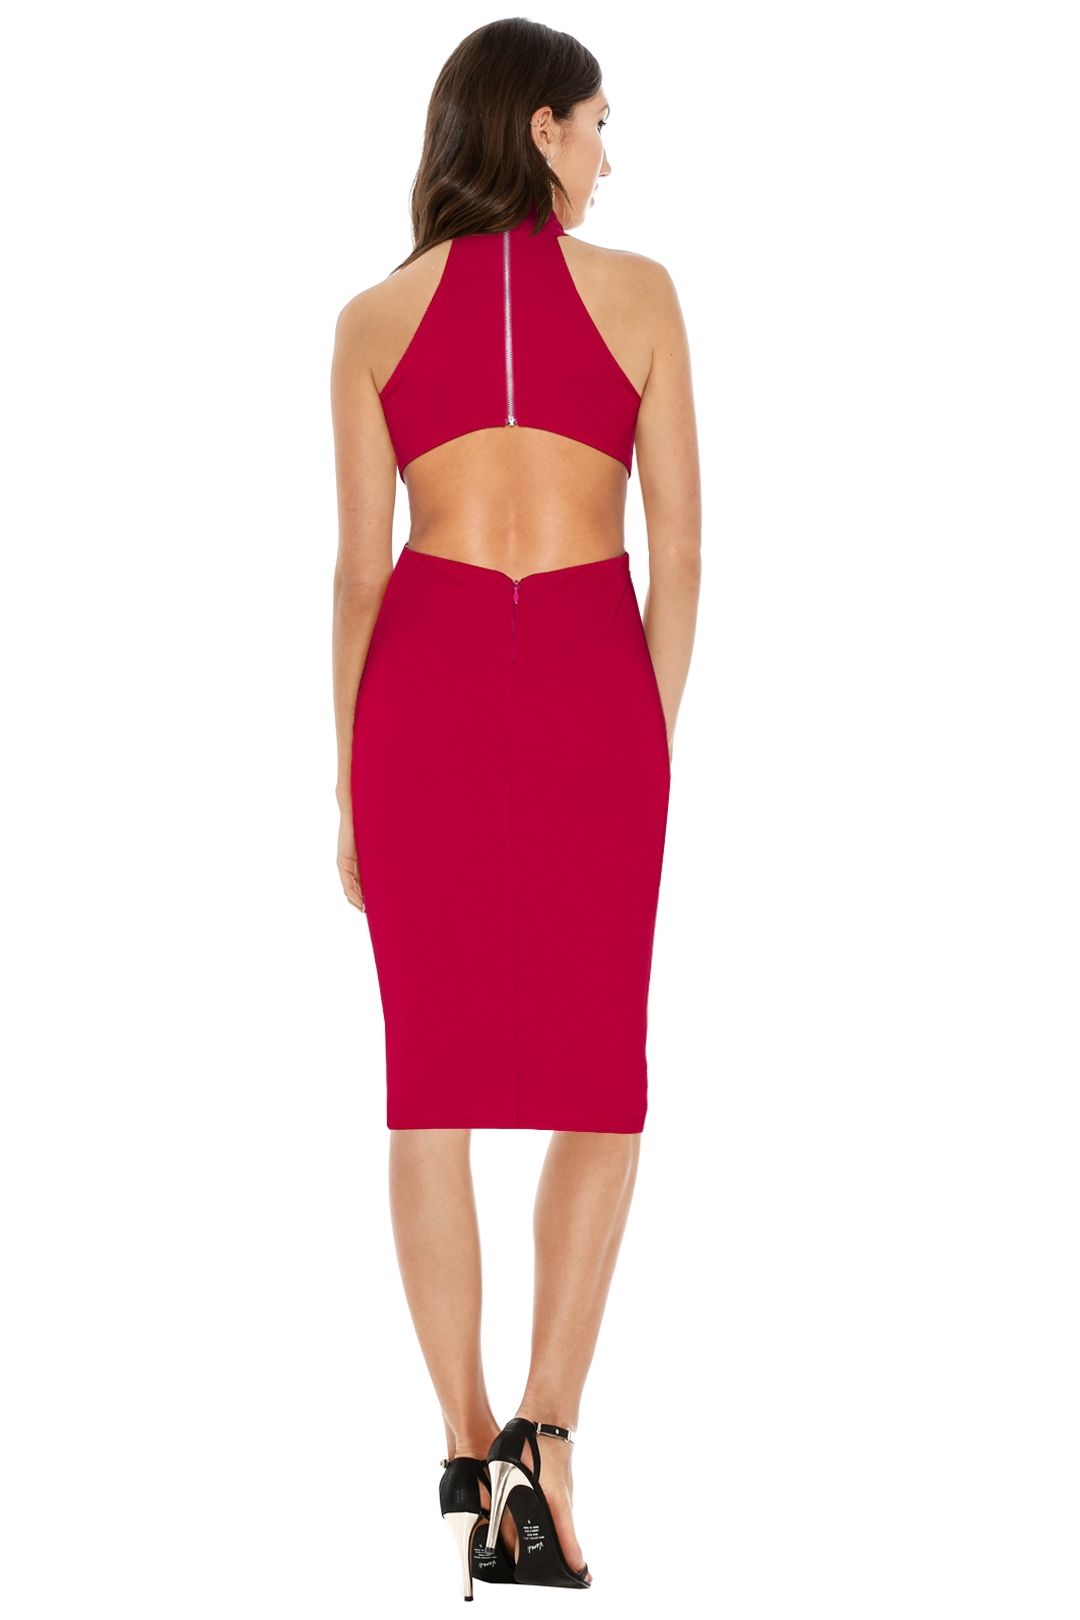 Nookie - Wicked Games Midi Dress - Red - Back